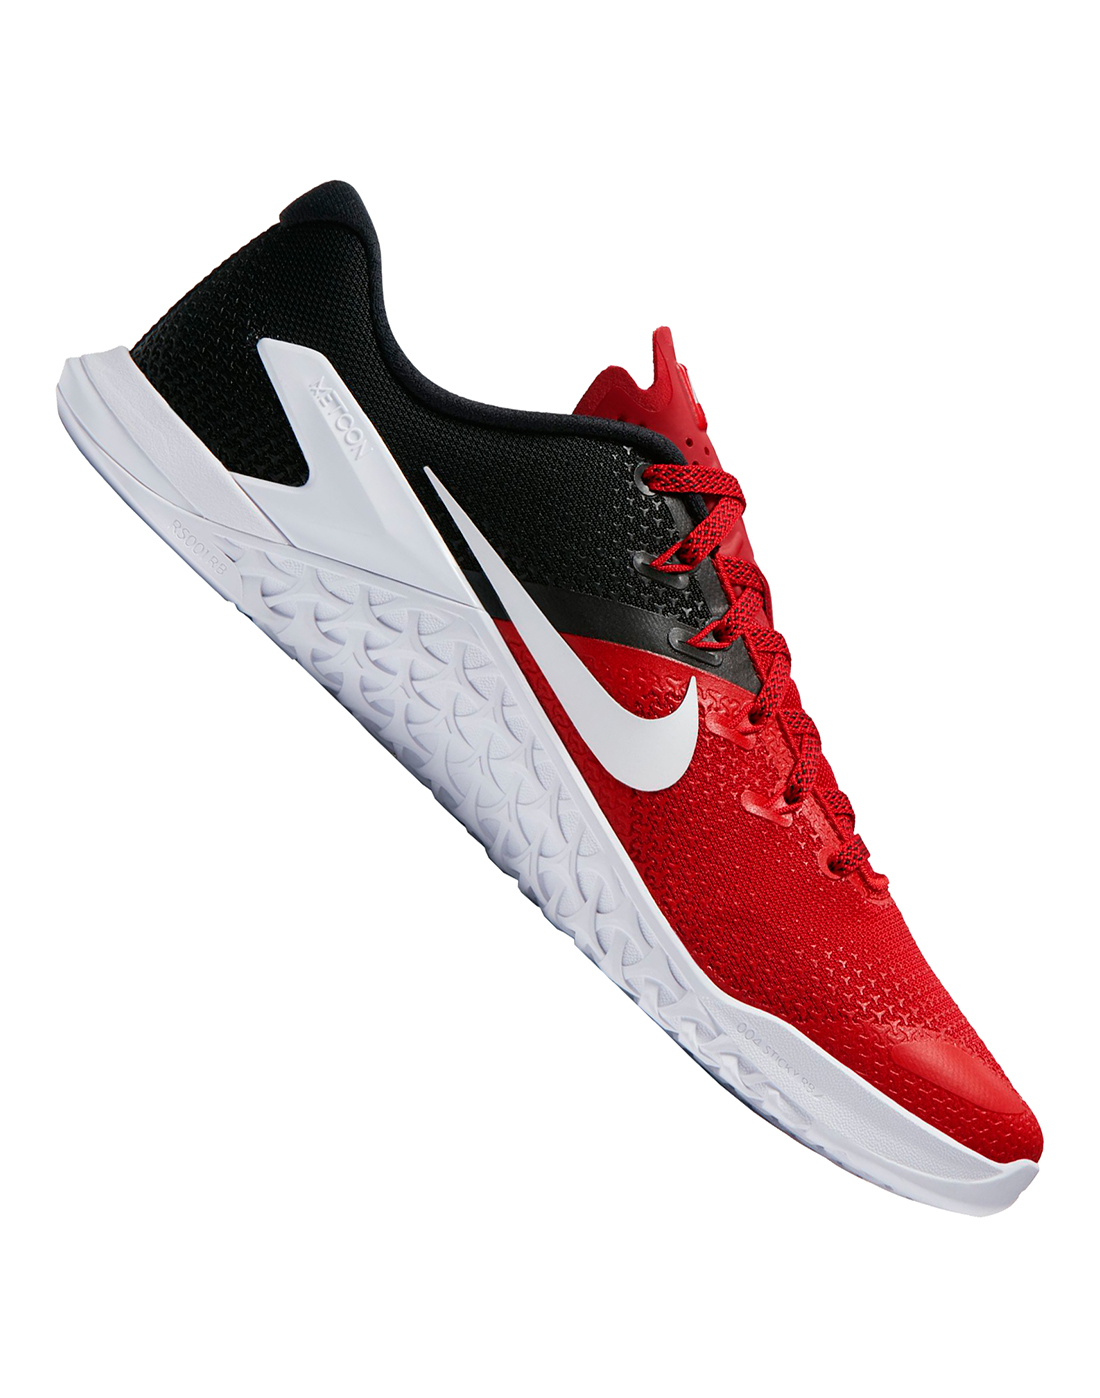 Men's Nike Metcon 4 | Red | Life Style Sports